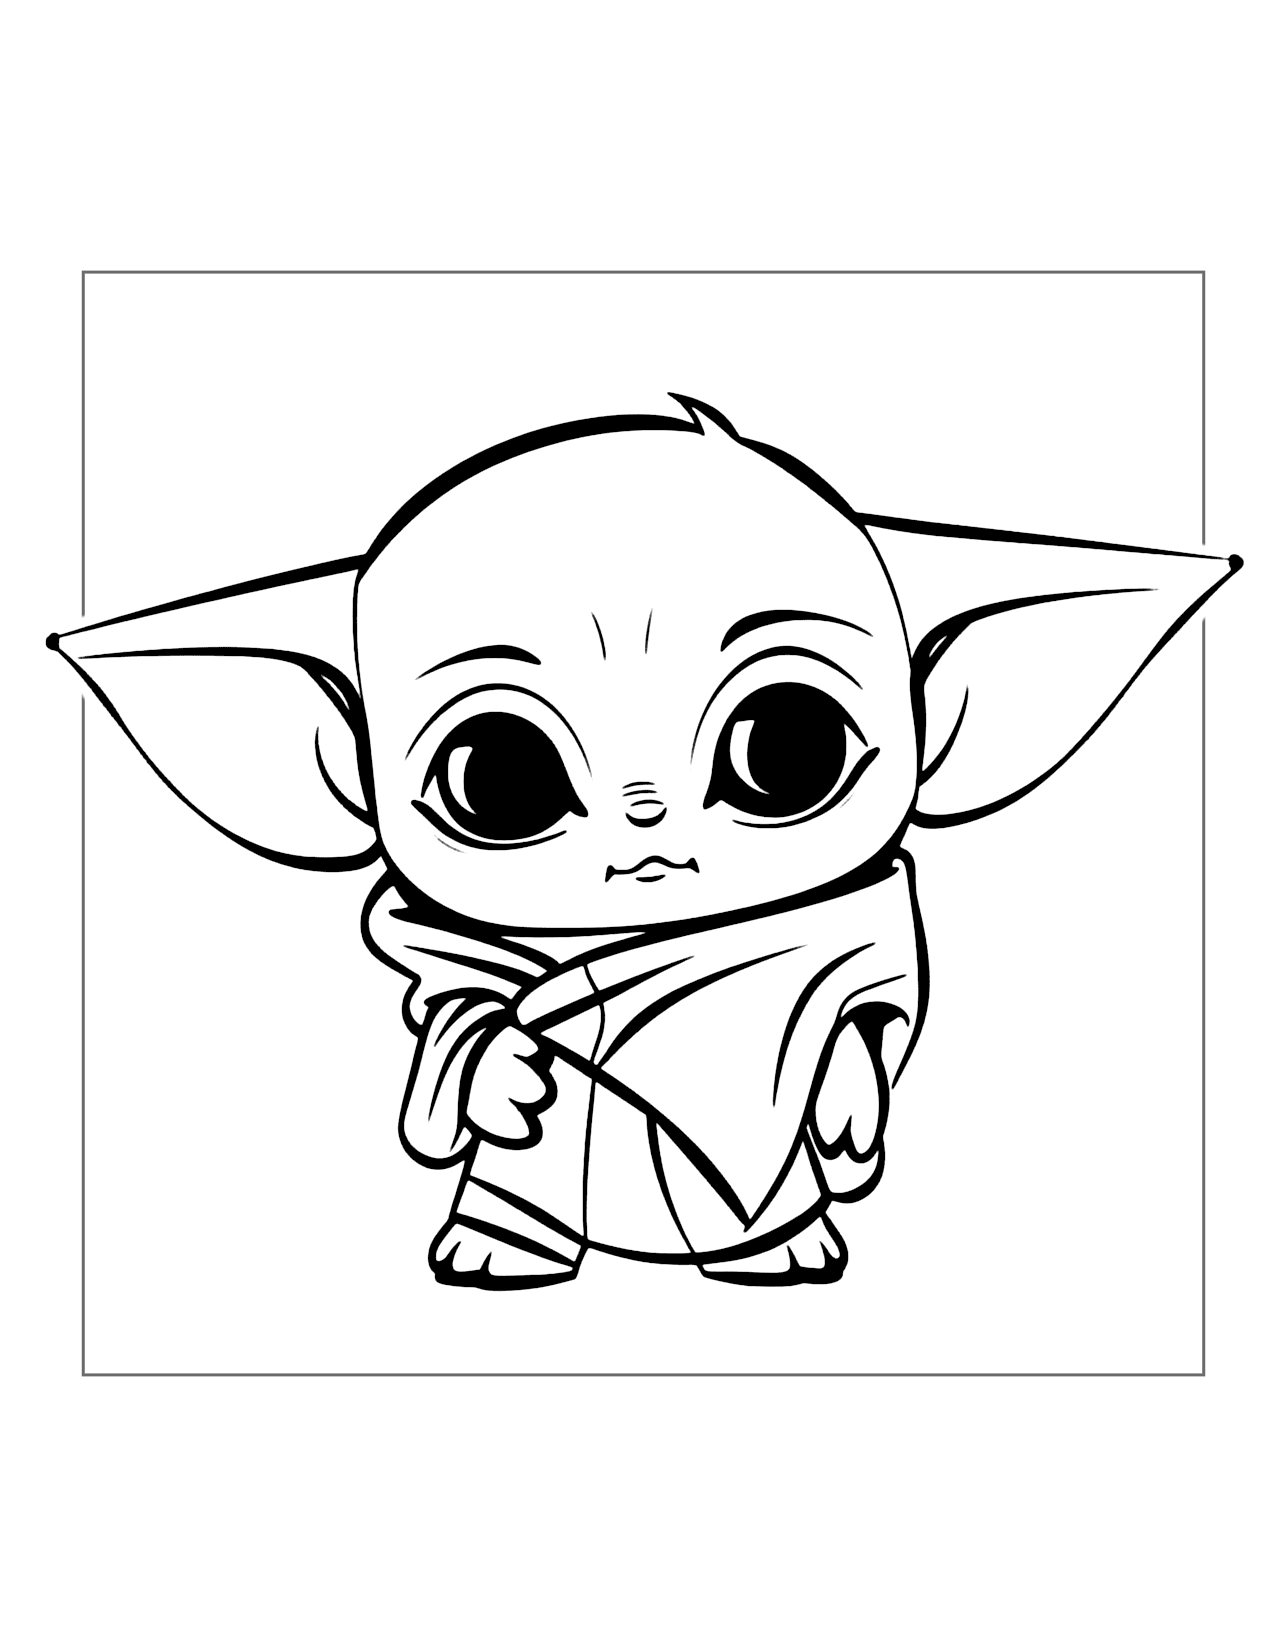 The Cutest Baby Yoda Coloring Page